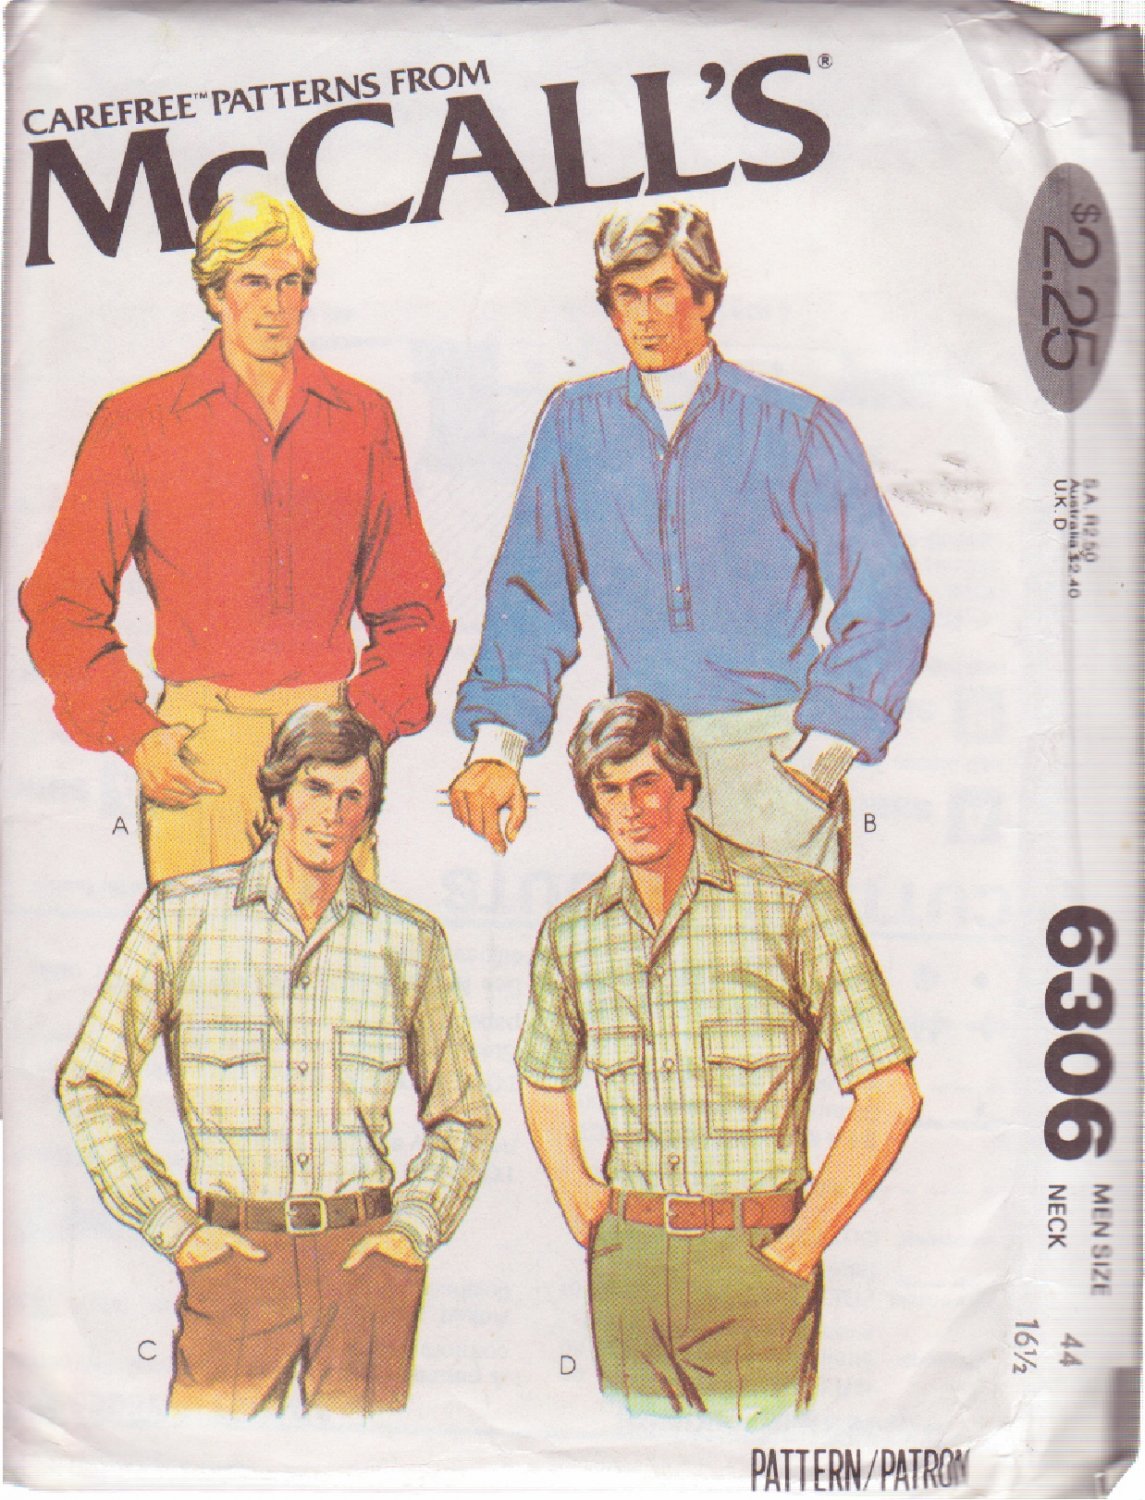 McCALL'S PATTERN 6306 SIZE 44 MEN'S SHIRT IN 4 VARIATIONS UNCUT